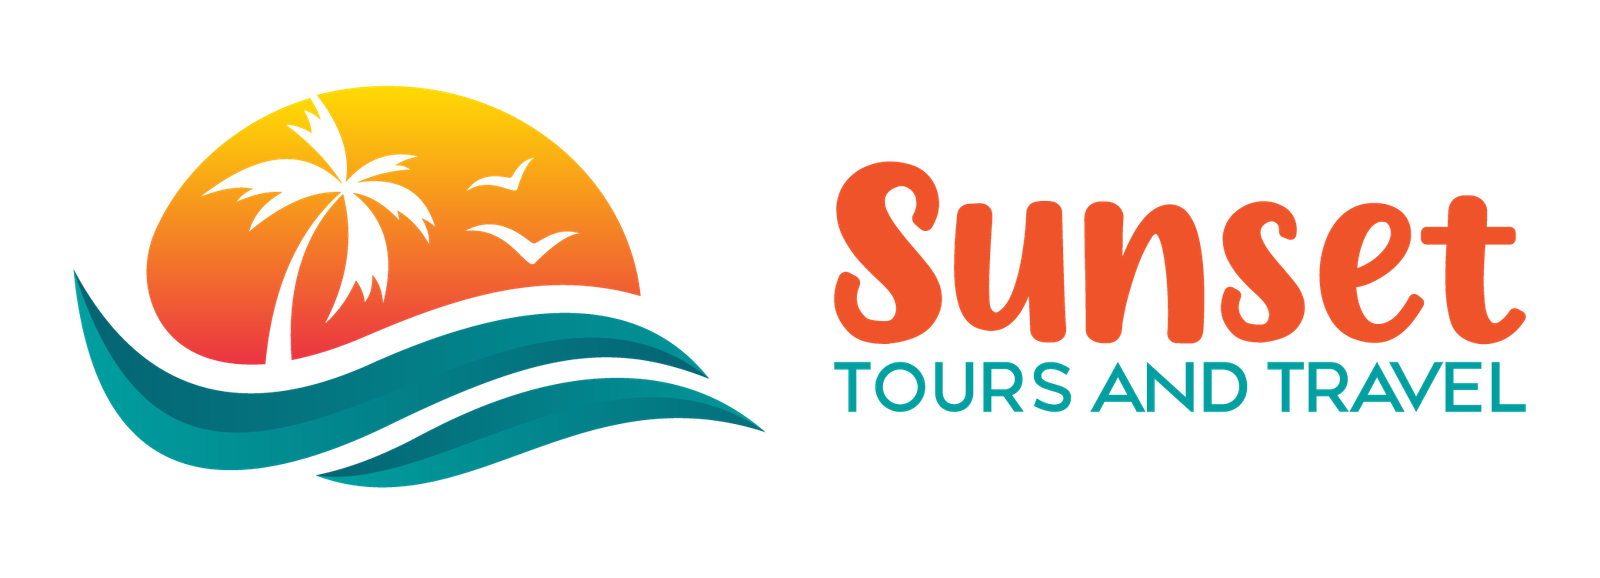 Sunset Tours and Travel